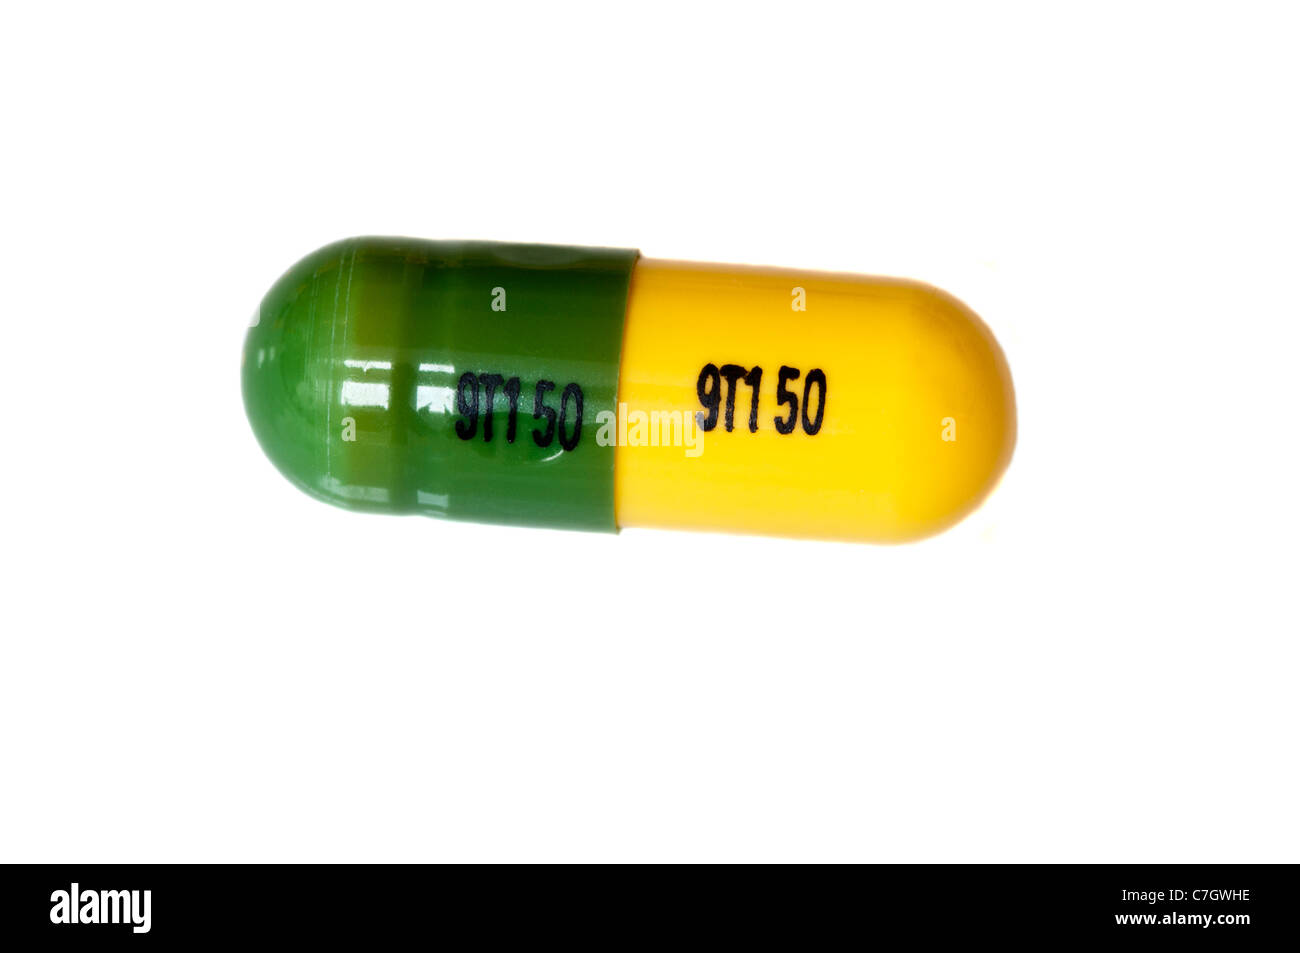 How strong is tramadol hcl 50 mg